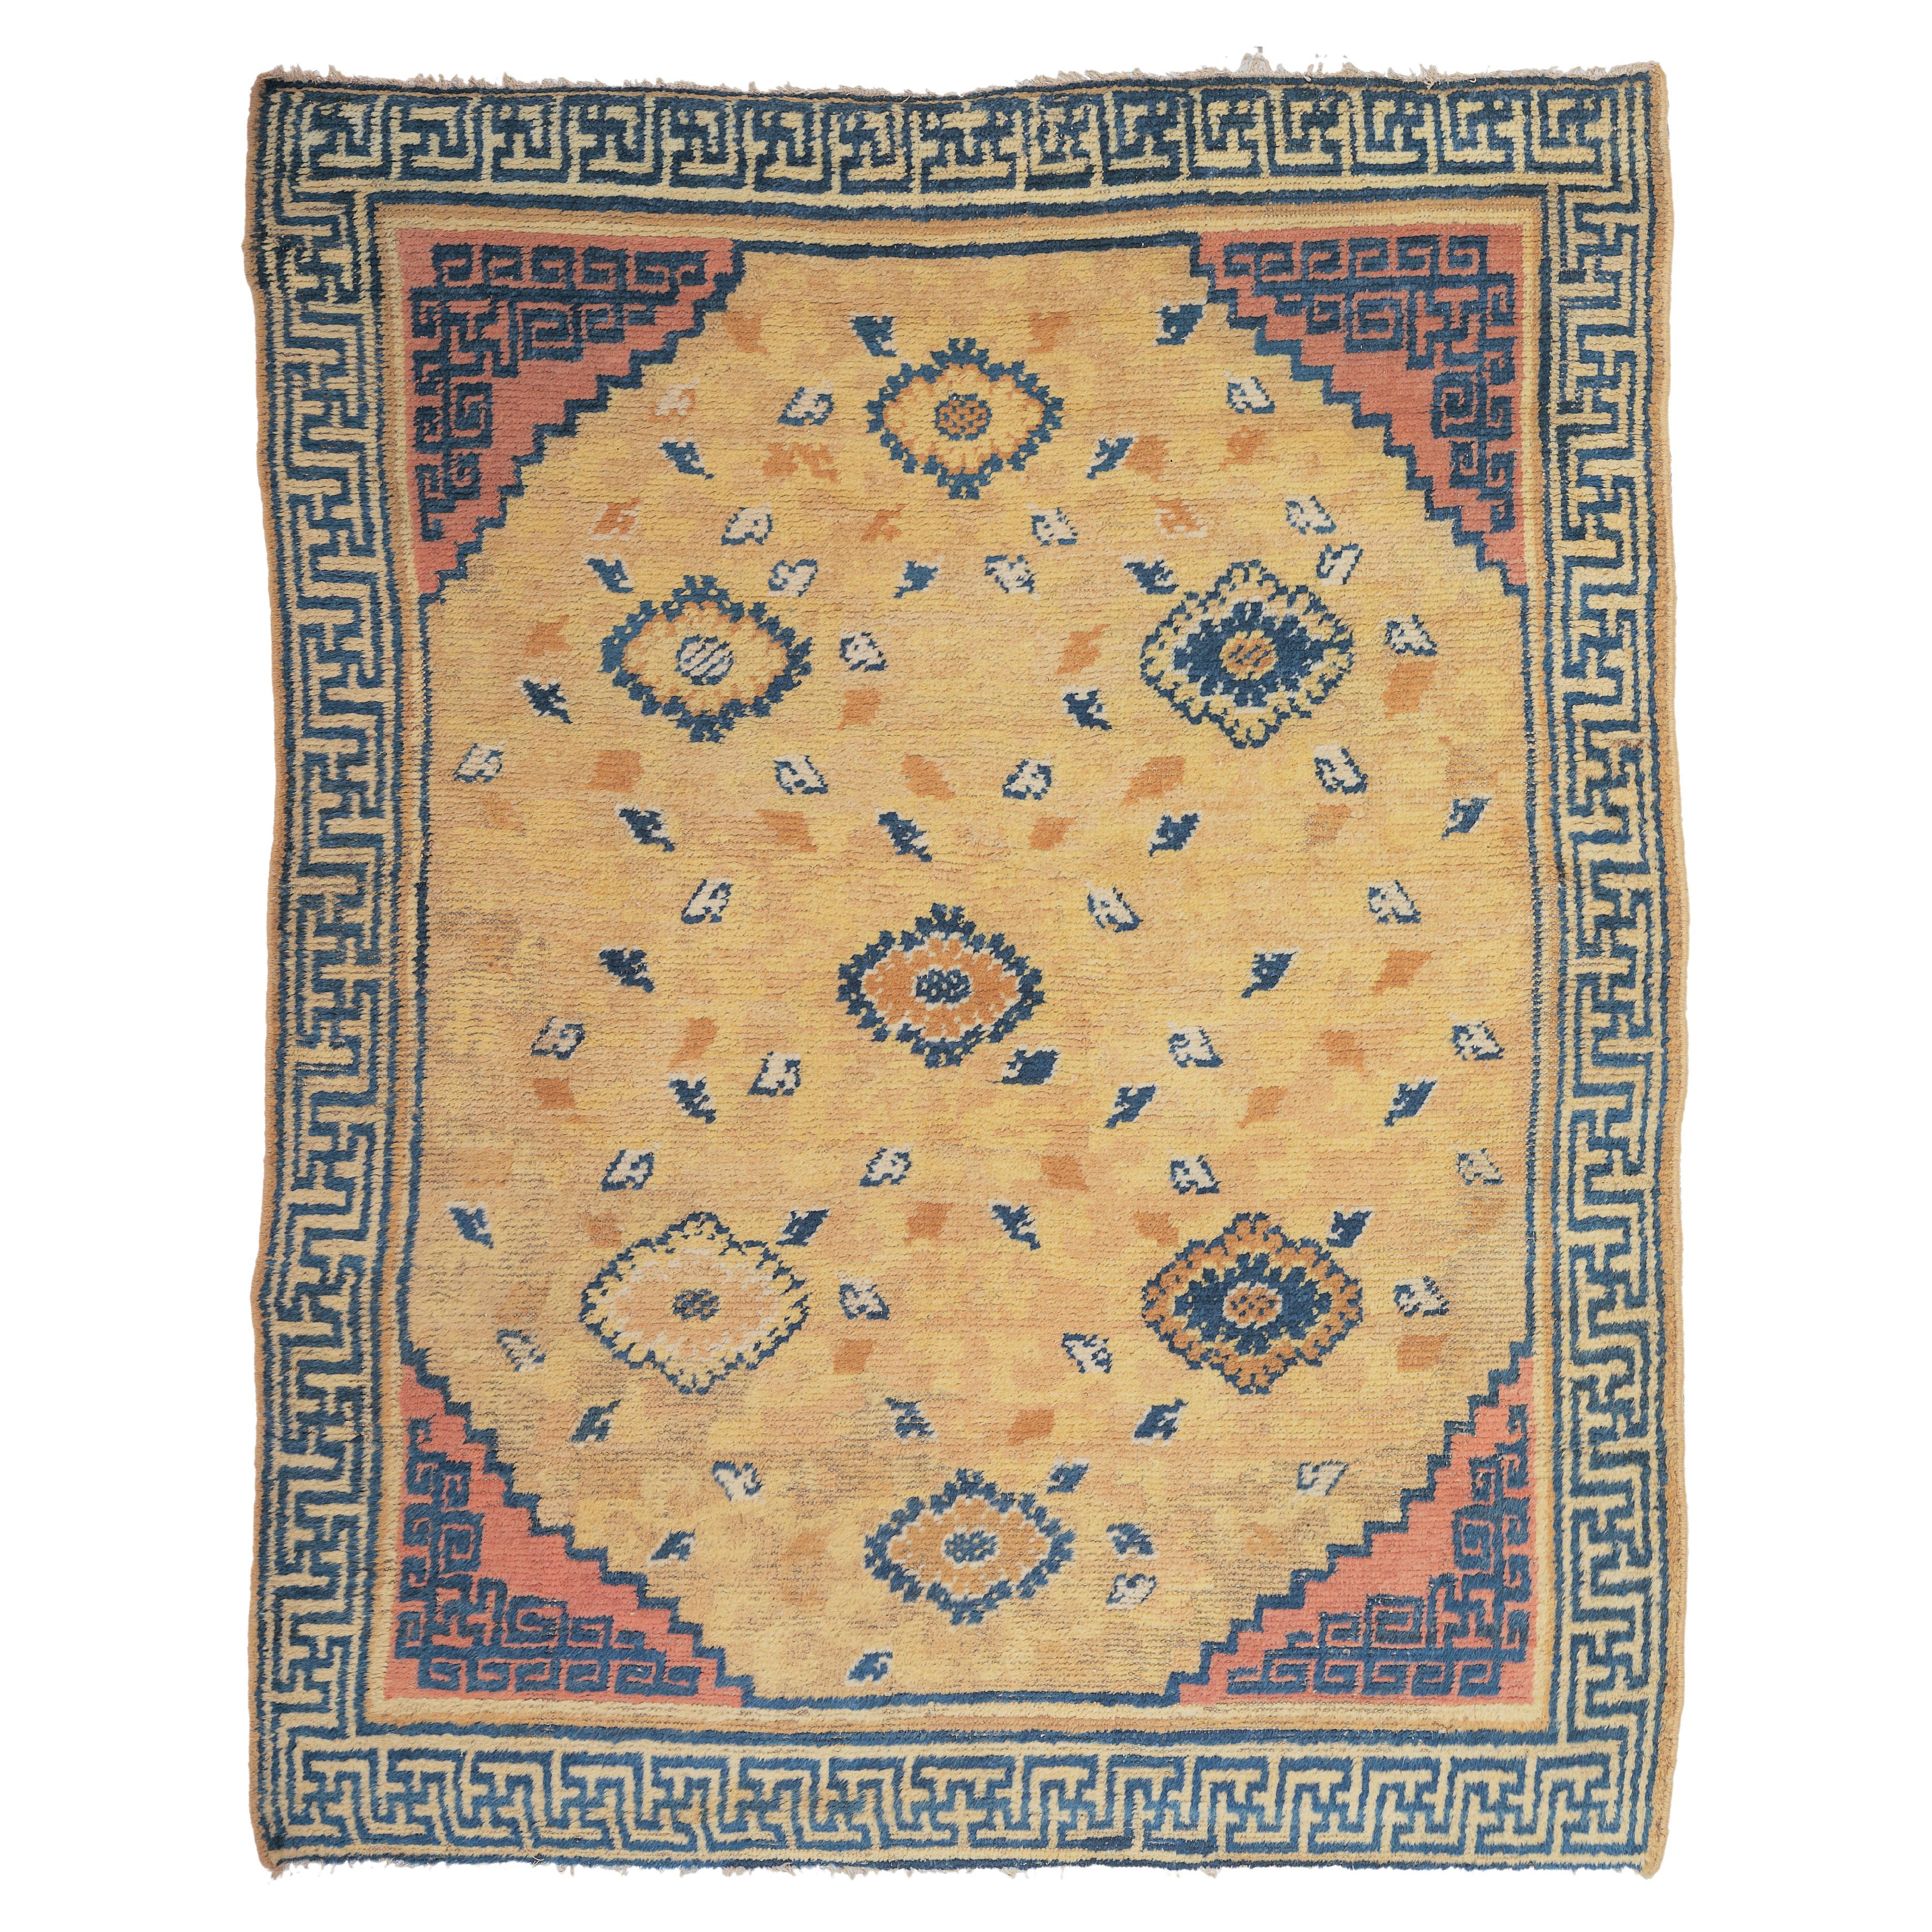 Early Chinese Kangxi Period '1662-1722' Ningxia Rug with Blossom Palmettes For Sale